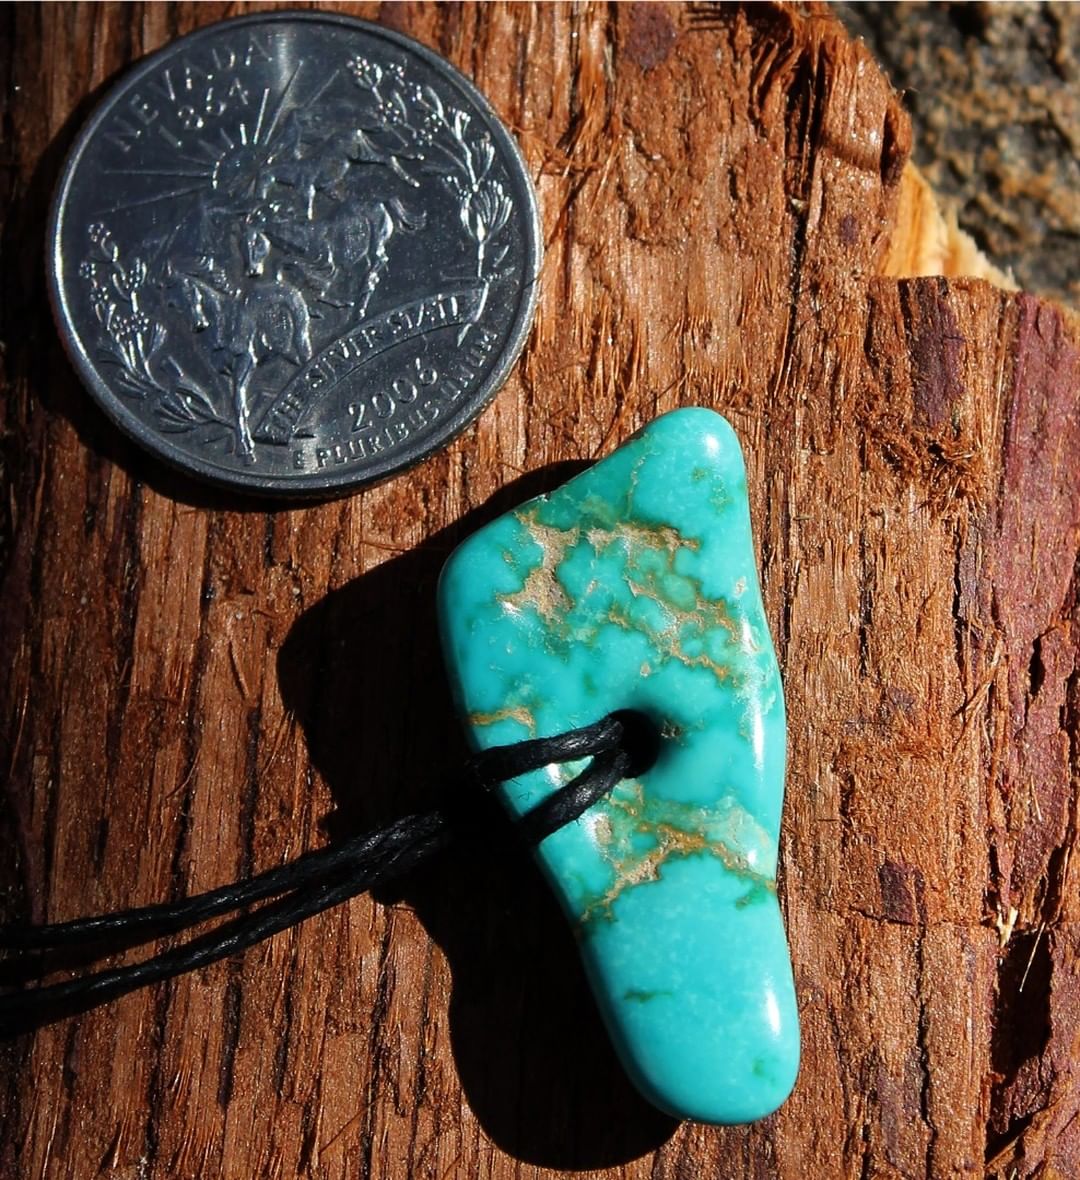 A hand polished natural blue Stone Mountain Turquoise focal bead 
 $65 for 19.7 carats
33x15x4.5 mm, 2.5 hole
Here is a Stone Mountain Turquoise vein nugget that has gone through a careful process of tumbling with several different polishing mediums. Then we drill the hole and widen it out before hand polishing the stone with a foredom. This stone was carefully selected for it’s ability to take a hole of this size without cracking.
